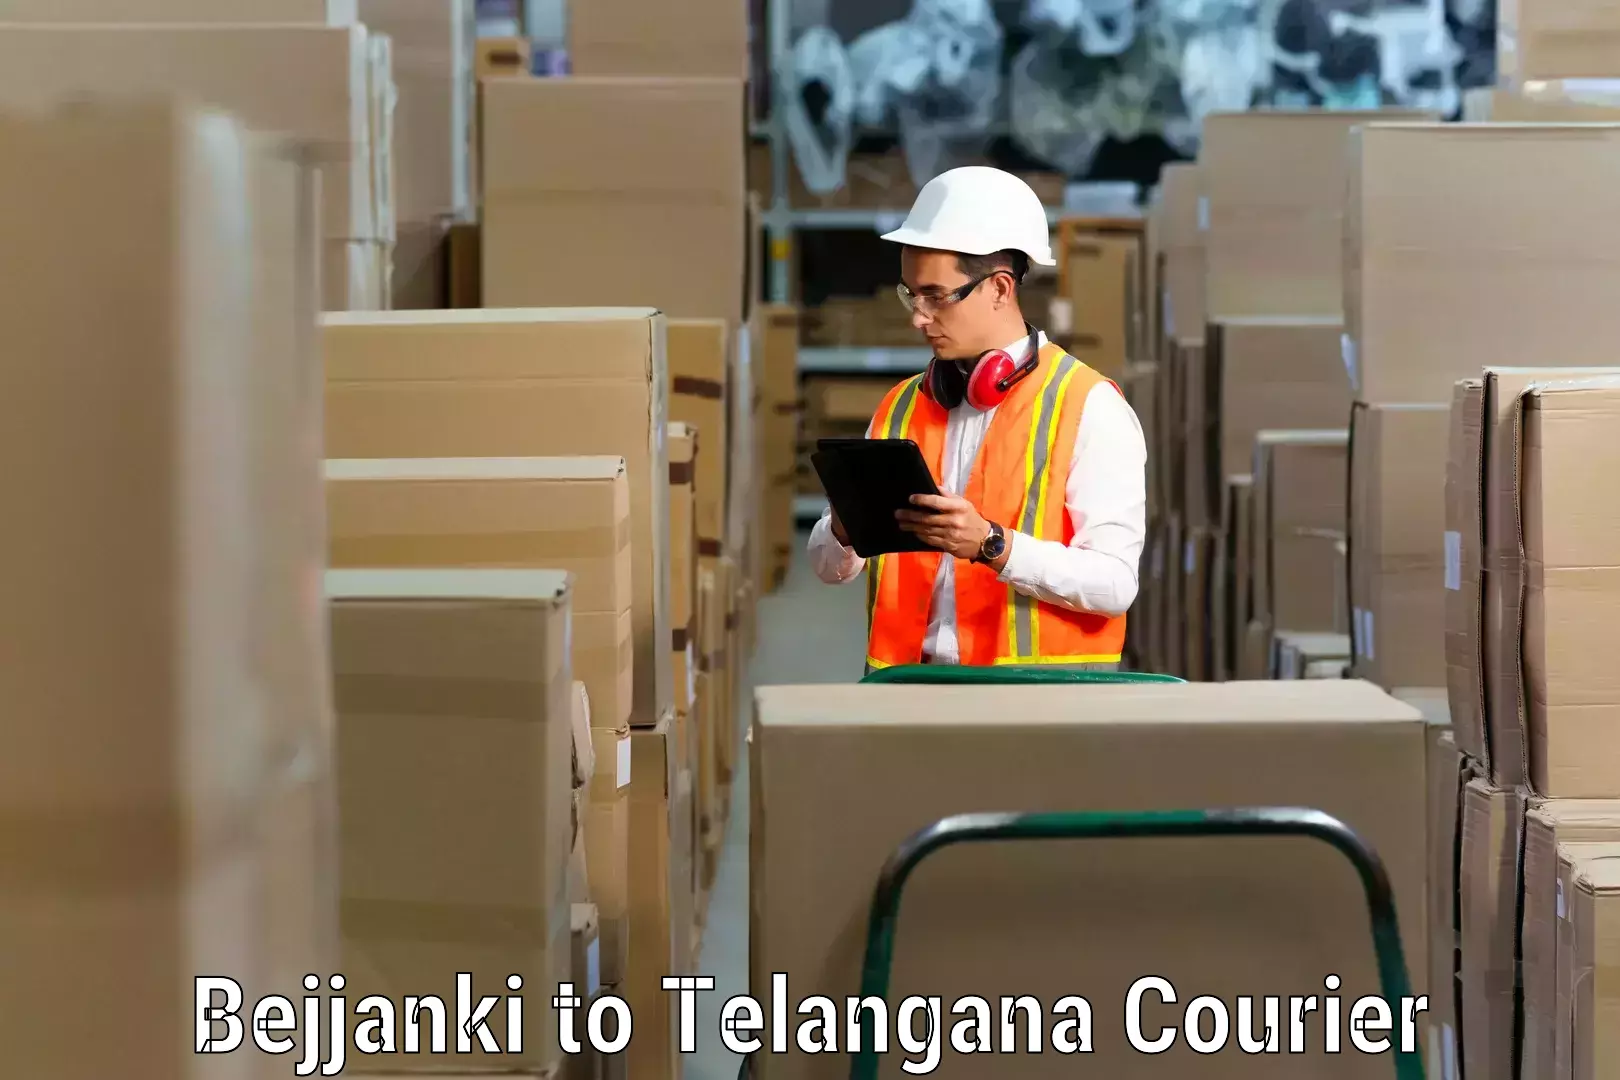 Professional relocation services in Bejjanki to Jainad